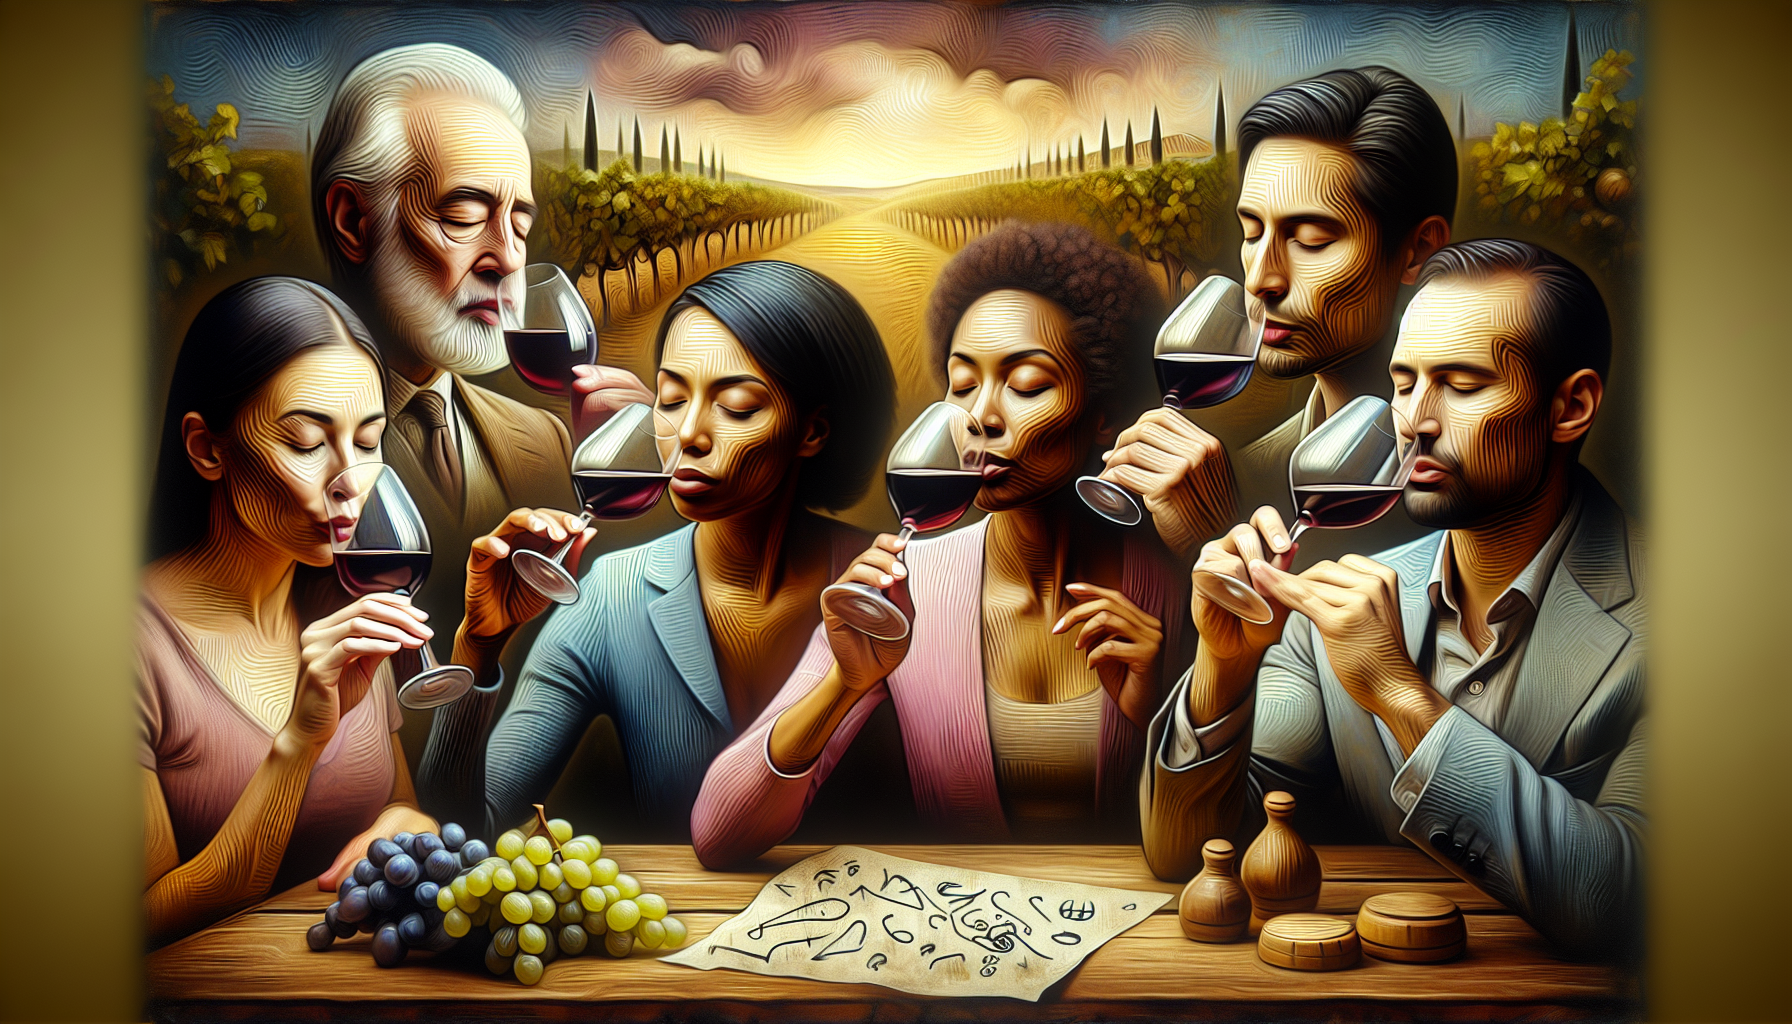 Artistic representation of a group of wine enthusiasts enjoying a tasting experience